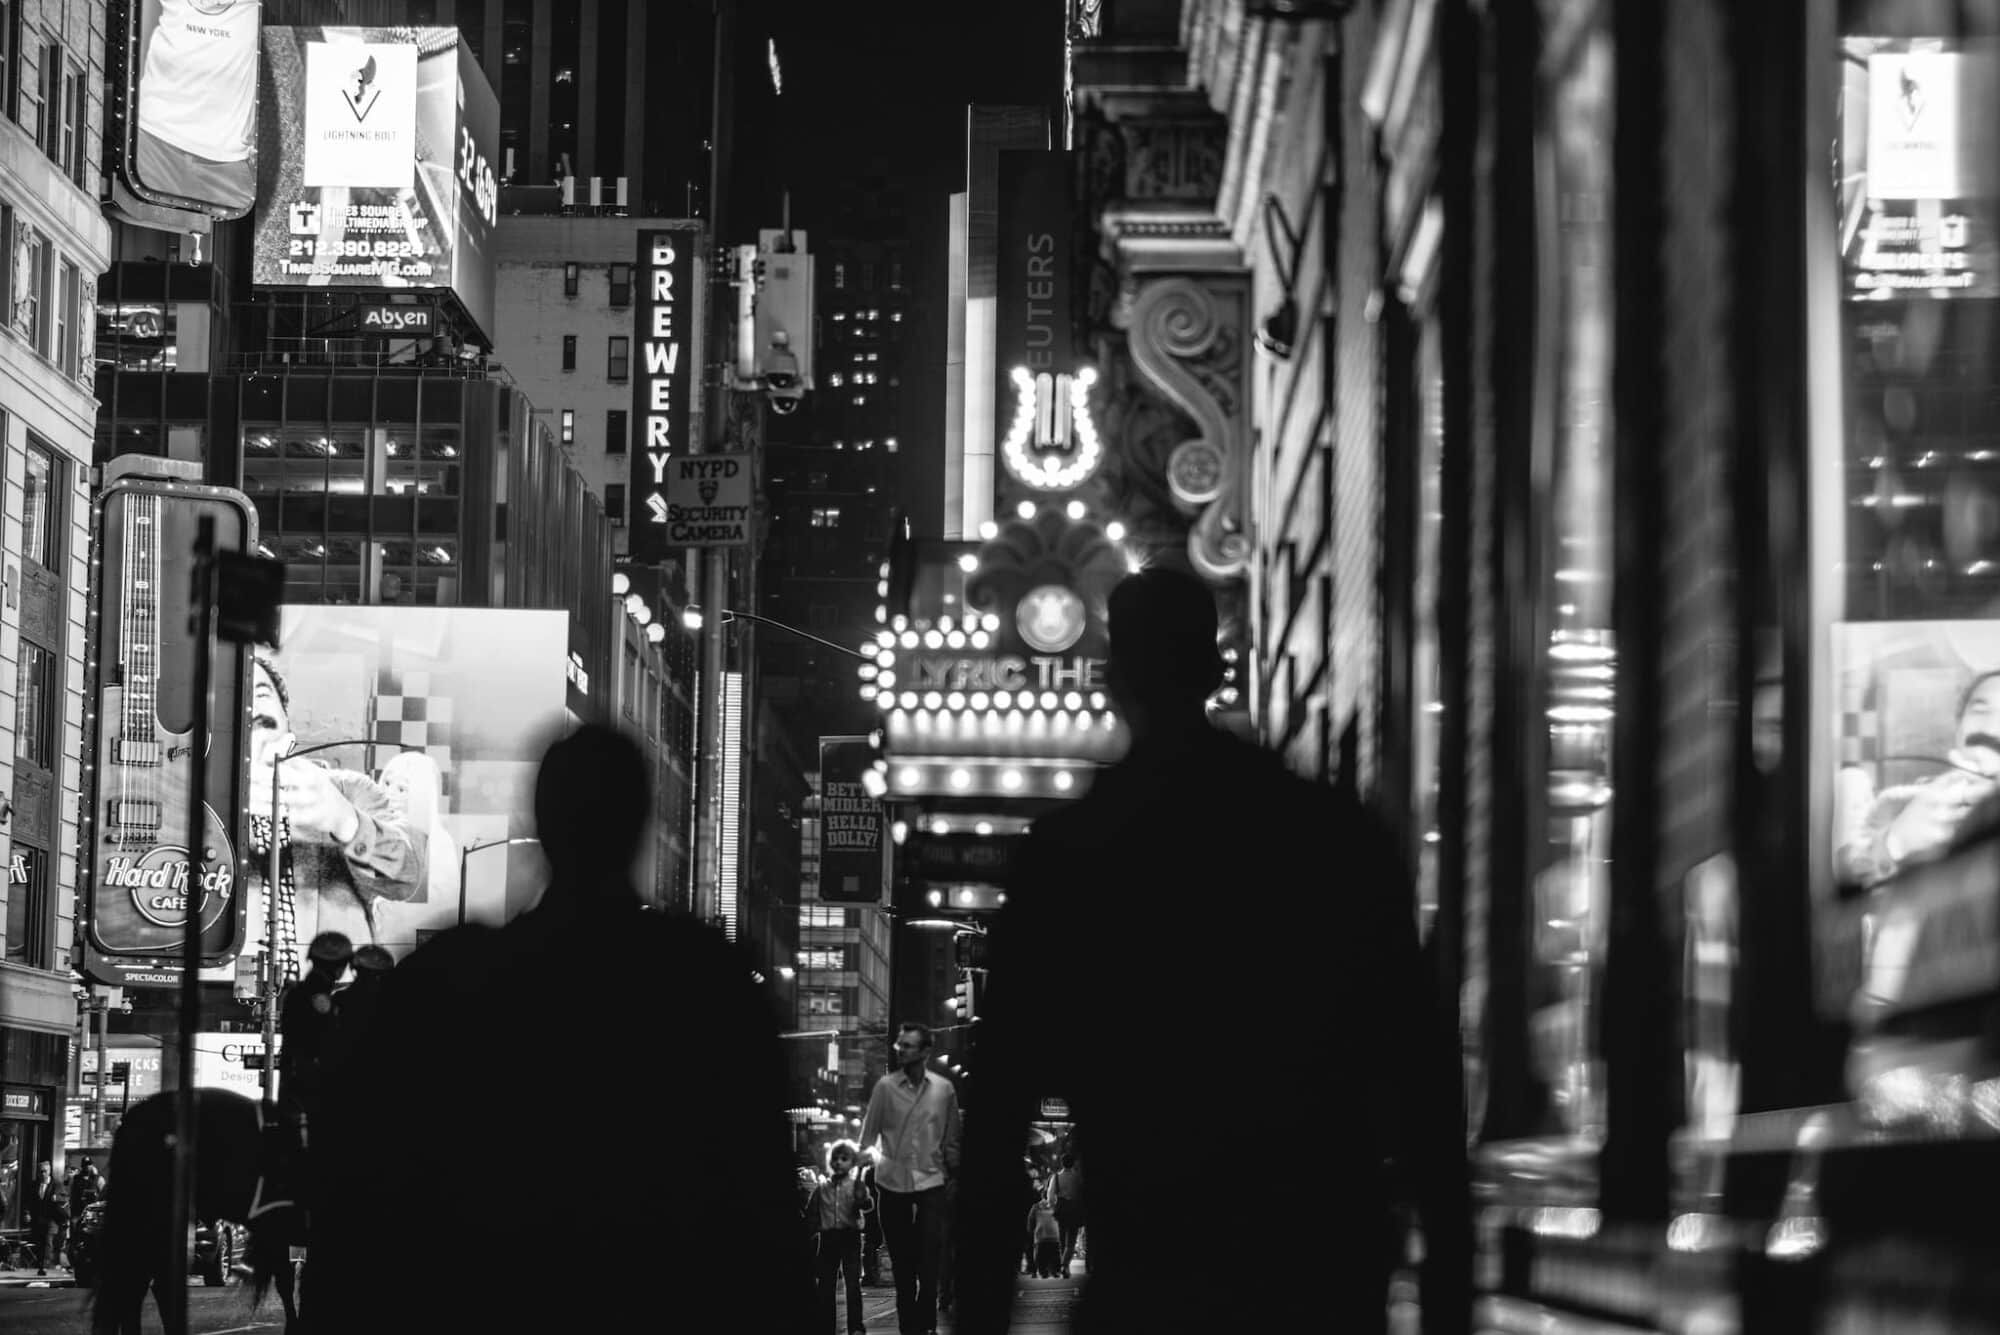 Two men photographed from behind walking on Broadway in NYC in the theatre district, photographed in black and white.